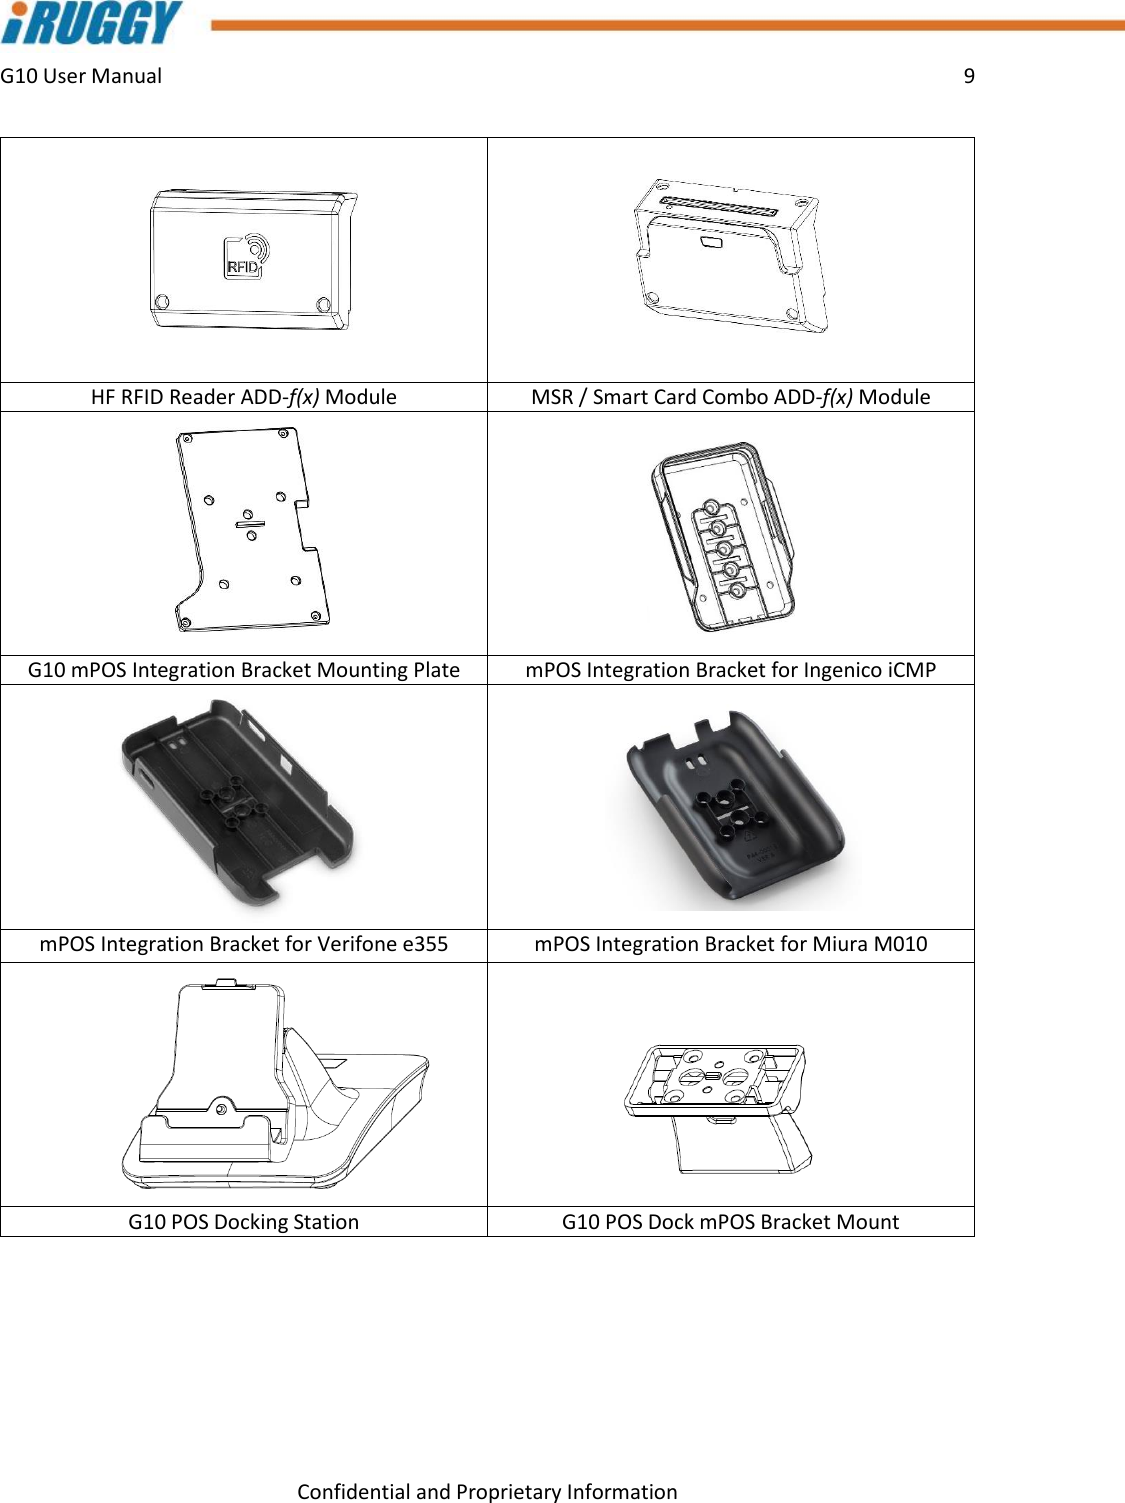 G10 User Manual    9    Confidential and Proprietary Information   HF RFID Reader ADD-f(x) Module MSR / Smart Card Combo ADD-f(x) Module   G10 mPOS Integration Bracket Mounting Plate mPOS Integration Bracket for Ingenico iCMP   mPOS Integration Bracket for Verifone e355 mPOS Integration Bracket for Miura M010   G10 POS Docking Station G10 POS Dock mPOS Bracket Mount  